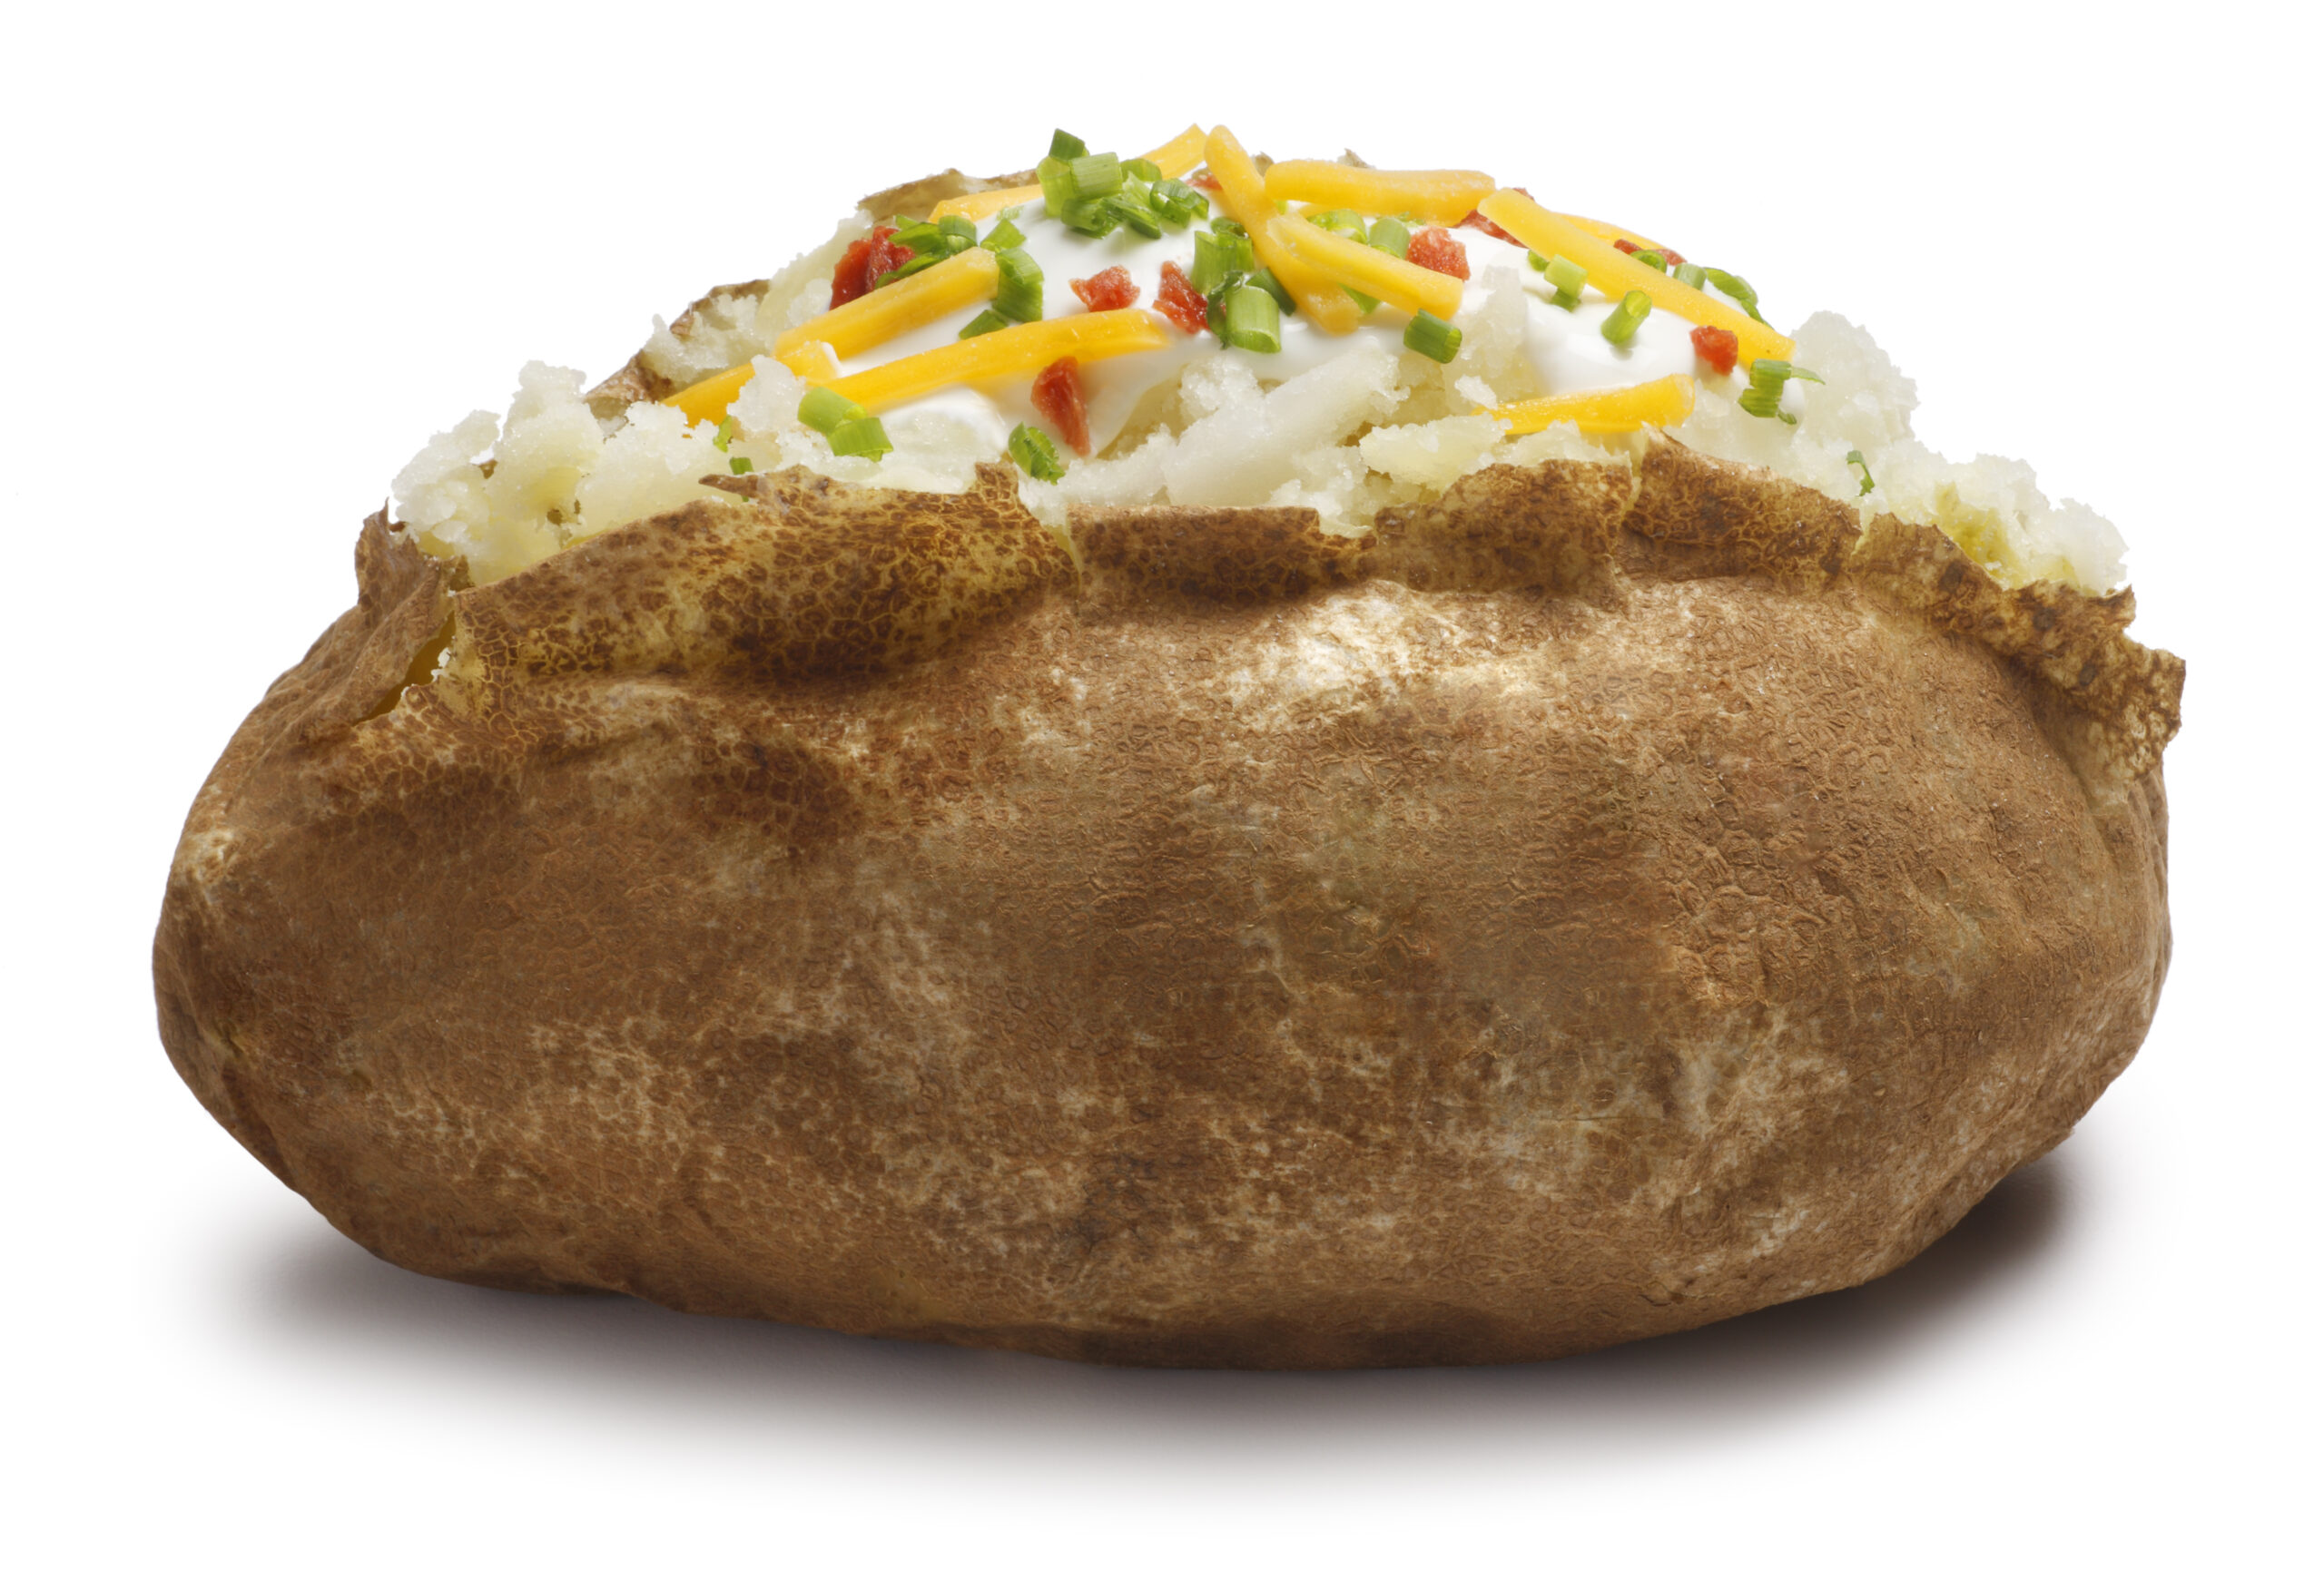 <h1 class="tribe-events-single-event-title">WOODLAWN CHRISTIAN CHURCH BAKED POTATO BAR</h1>